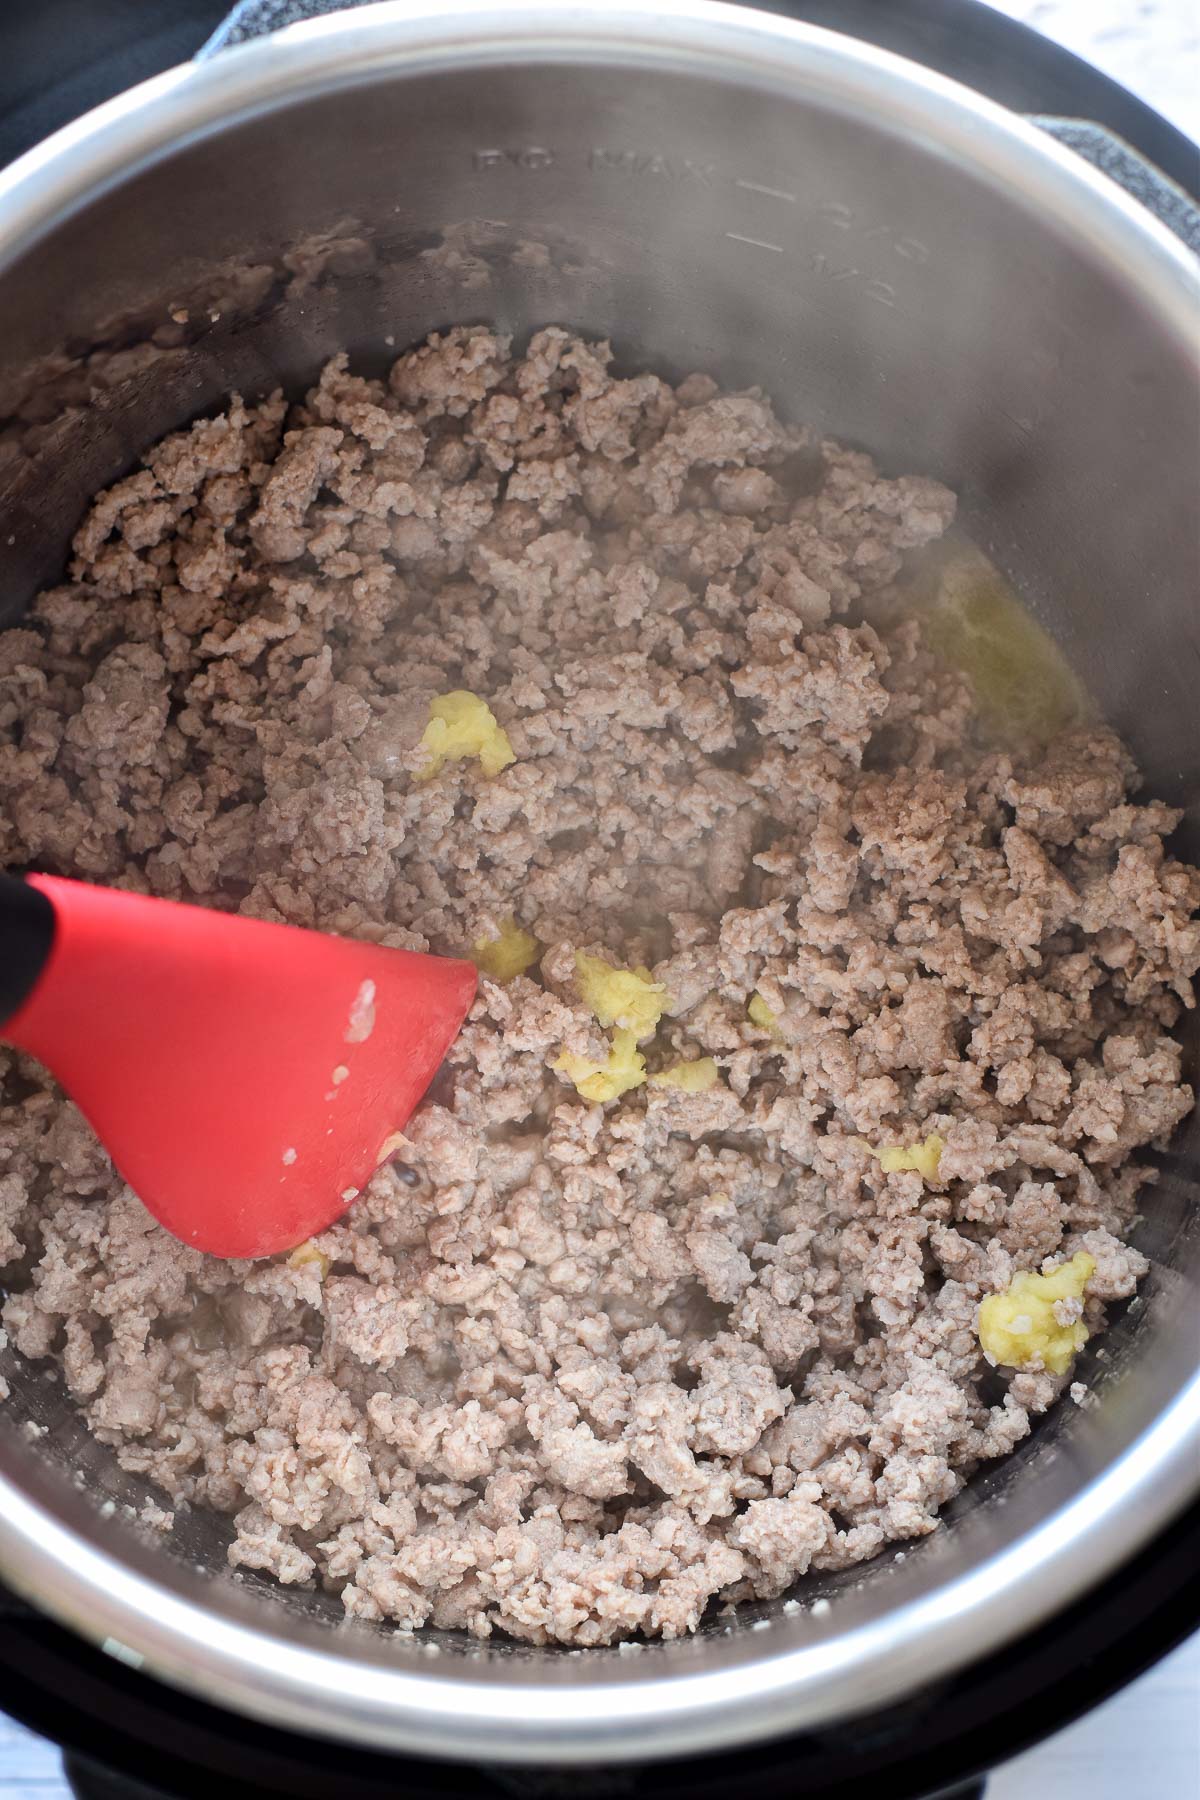 shredded garlic being sauteed with browned ground pork in an instant pot with a red spatula.